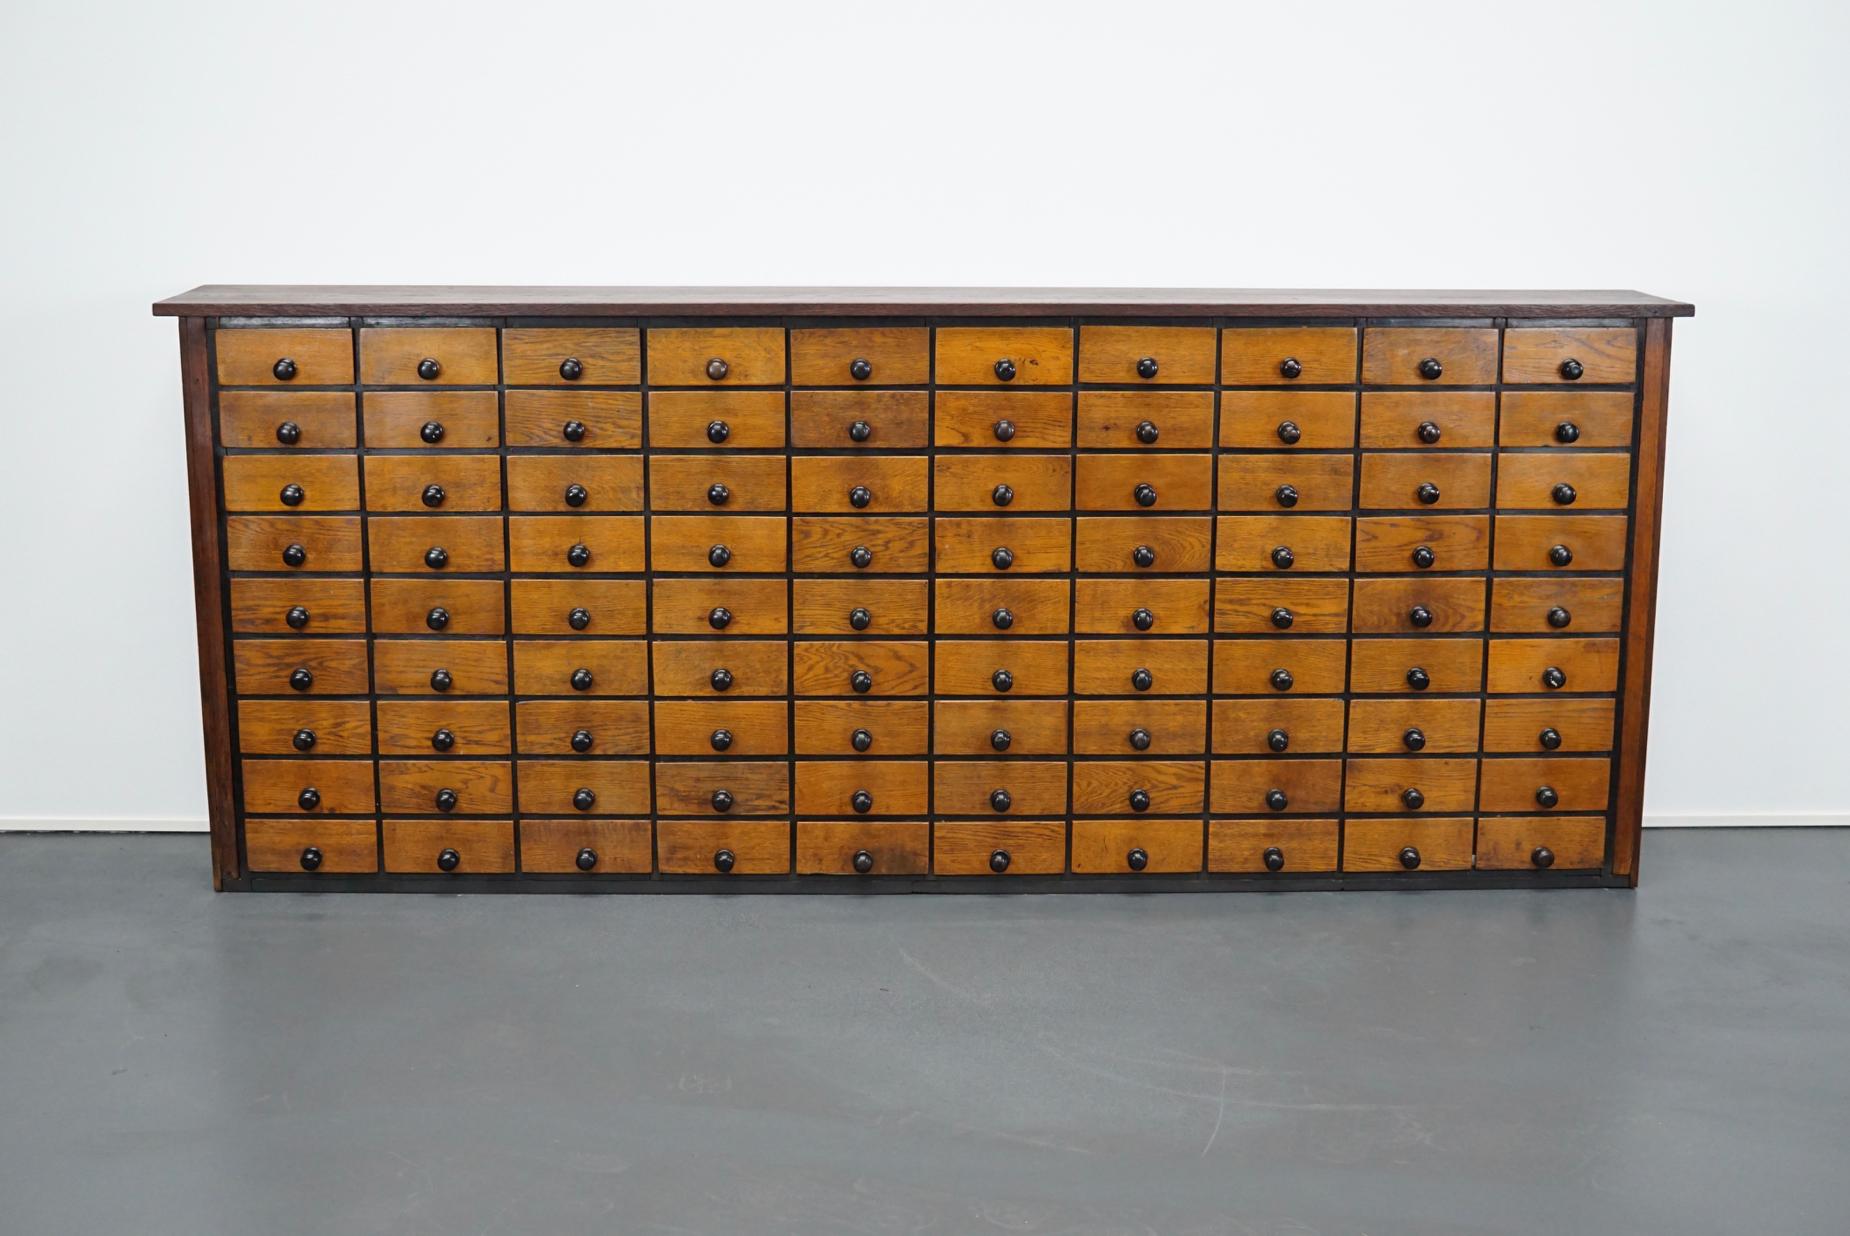 This apothecary cabinet was designed during the 1930s in the Netherlands. The piece features 90 drawers with iron hardware. It remains in a very good restored condition with signs of use and age.

The inside measurements of the drawers are: L 22.5